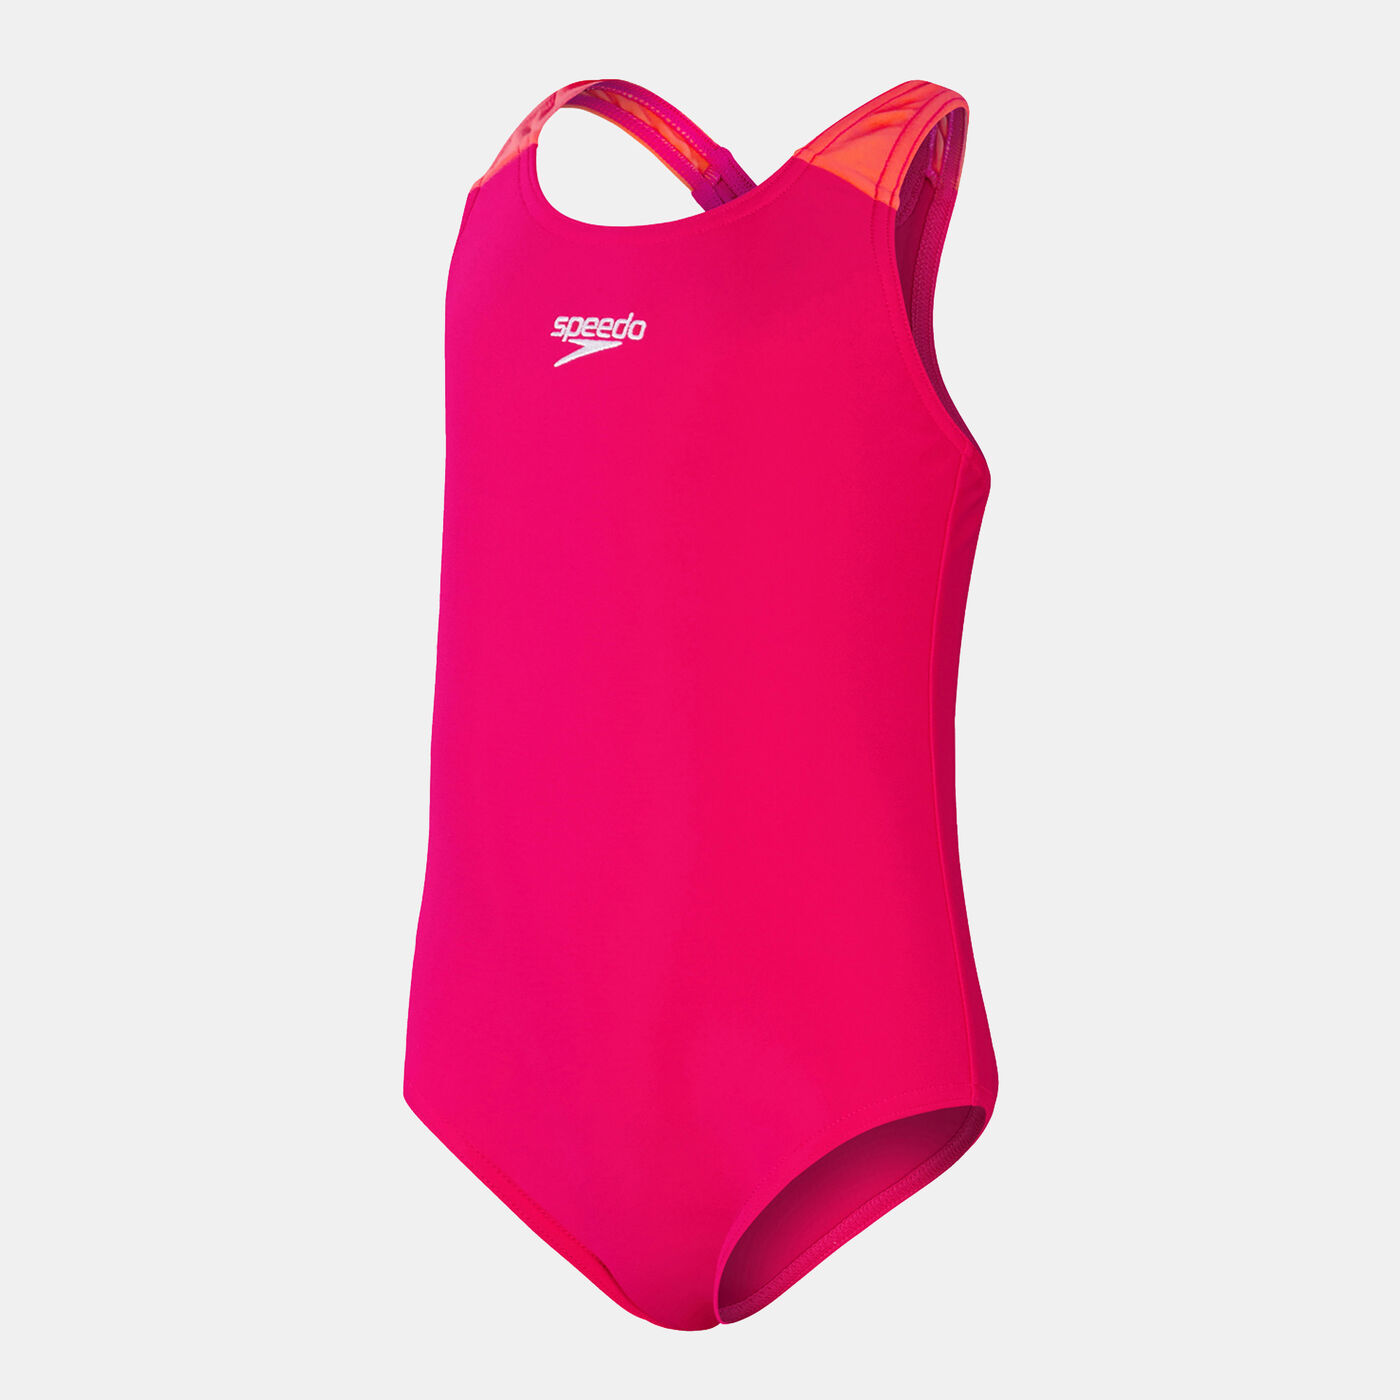 Kids' Medalist One-Piece Swimsuit (Baby and Toddler)